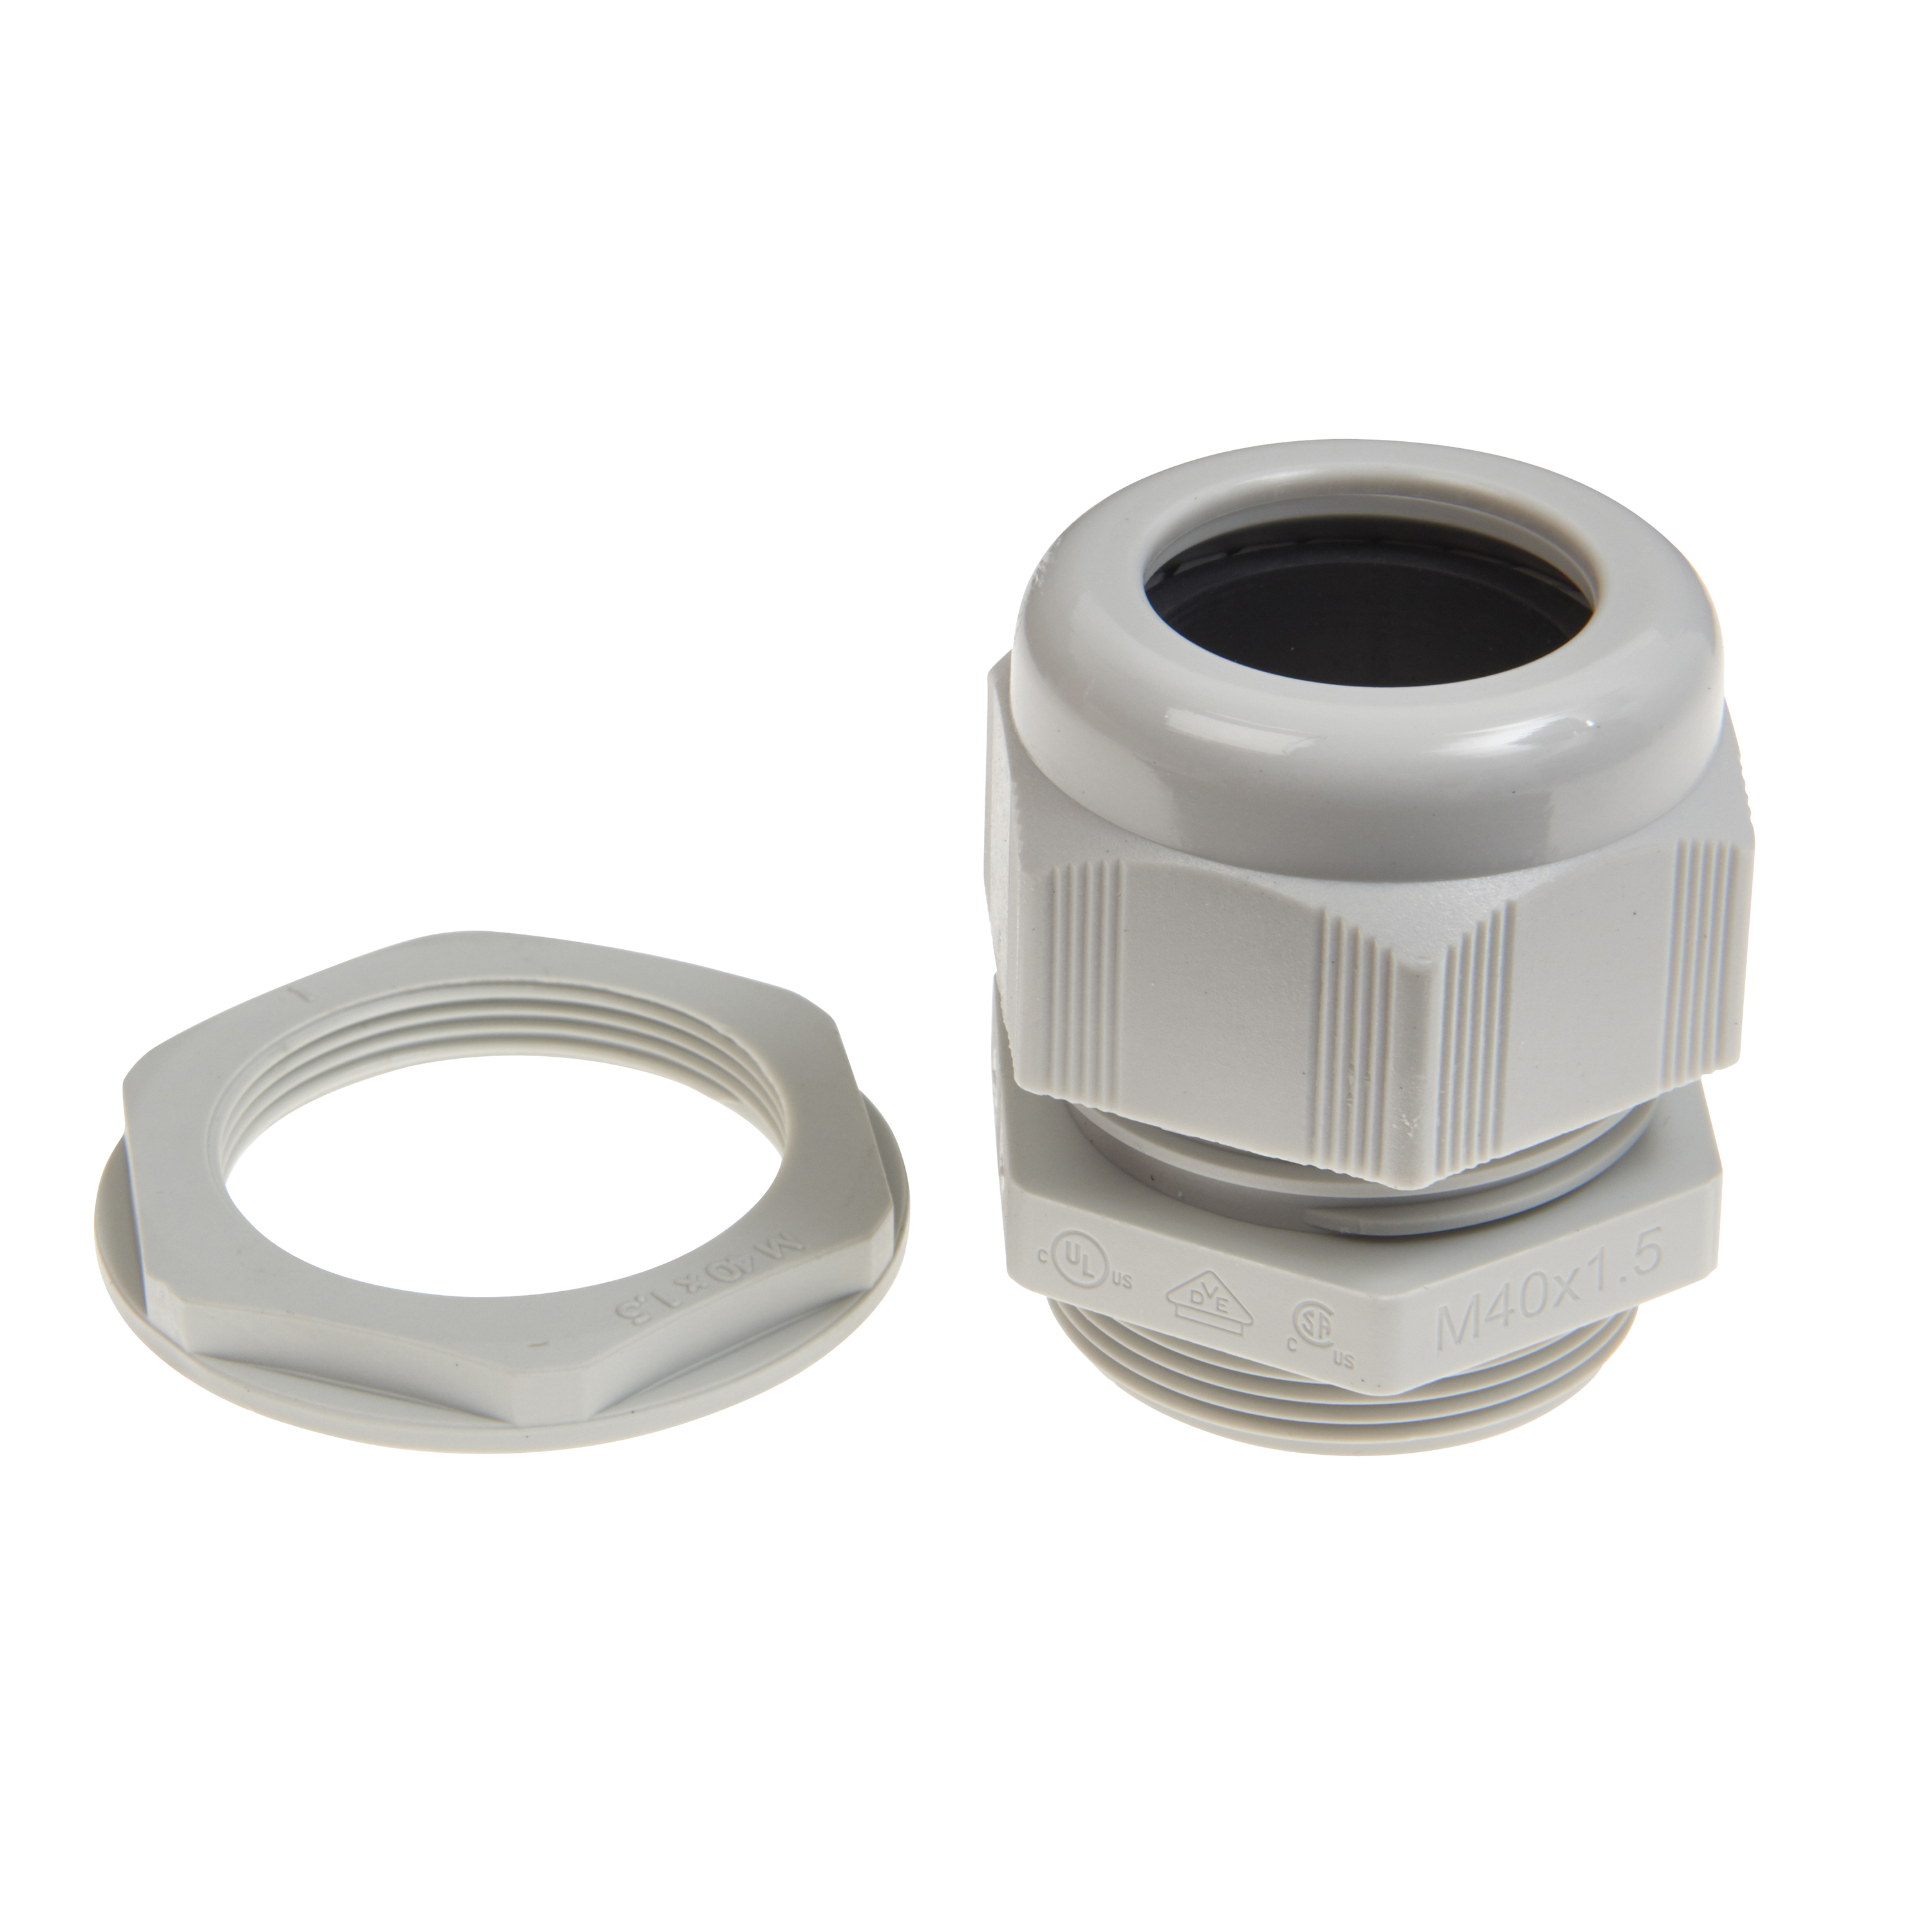 Schneider Electric ISM7 Series Cable Gland, M32 Thread, 21mm Min, 15mm Max, IP68